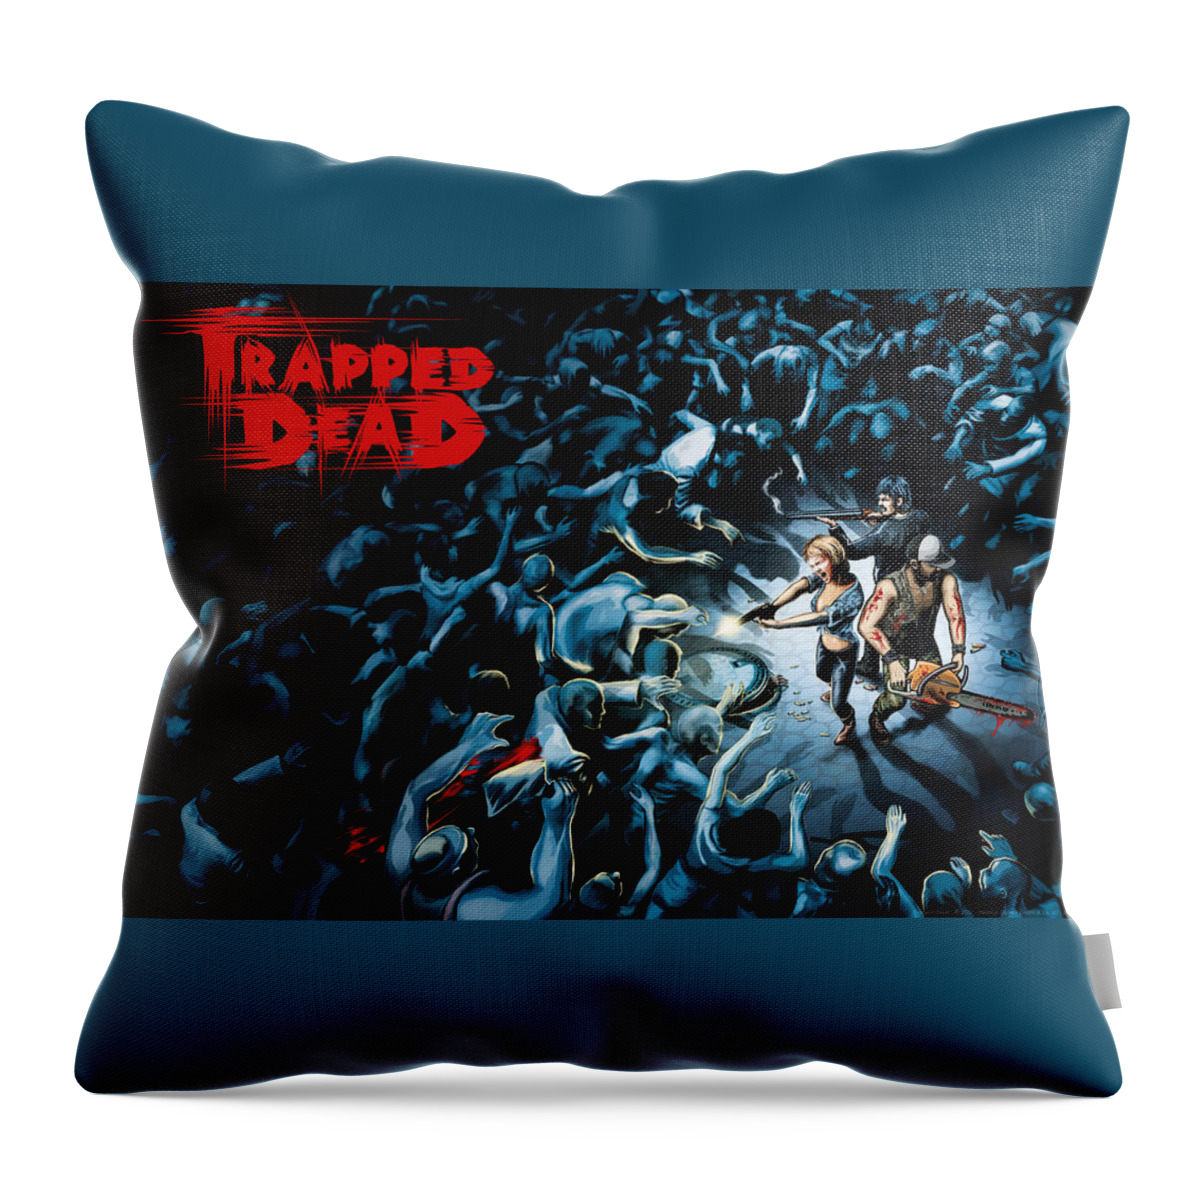 Trapped Dead Throw Pillow featuring the digital art Trapped Dead by Maye Loeser